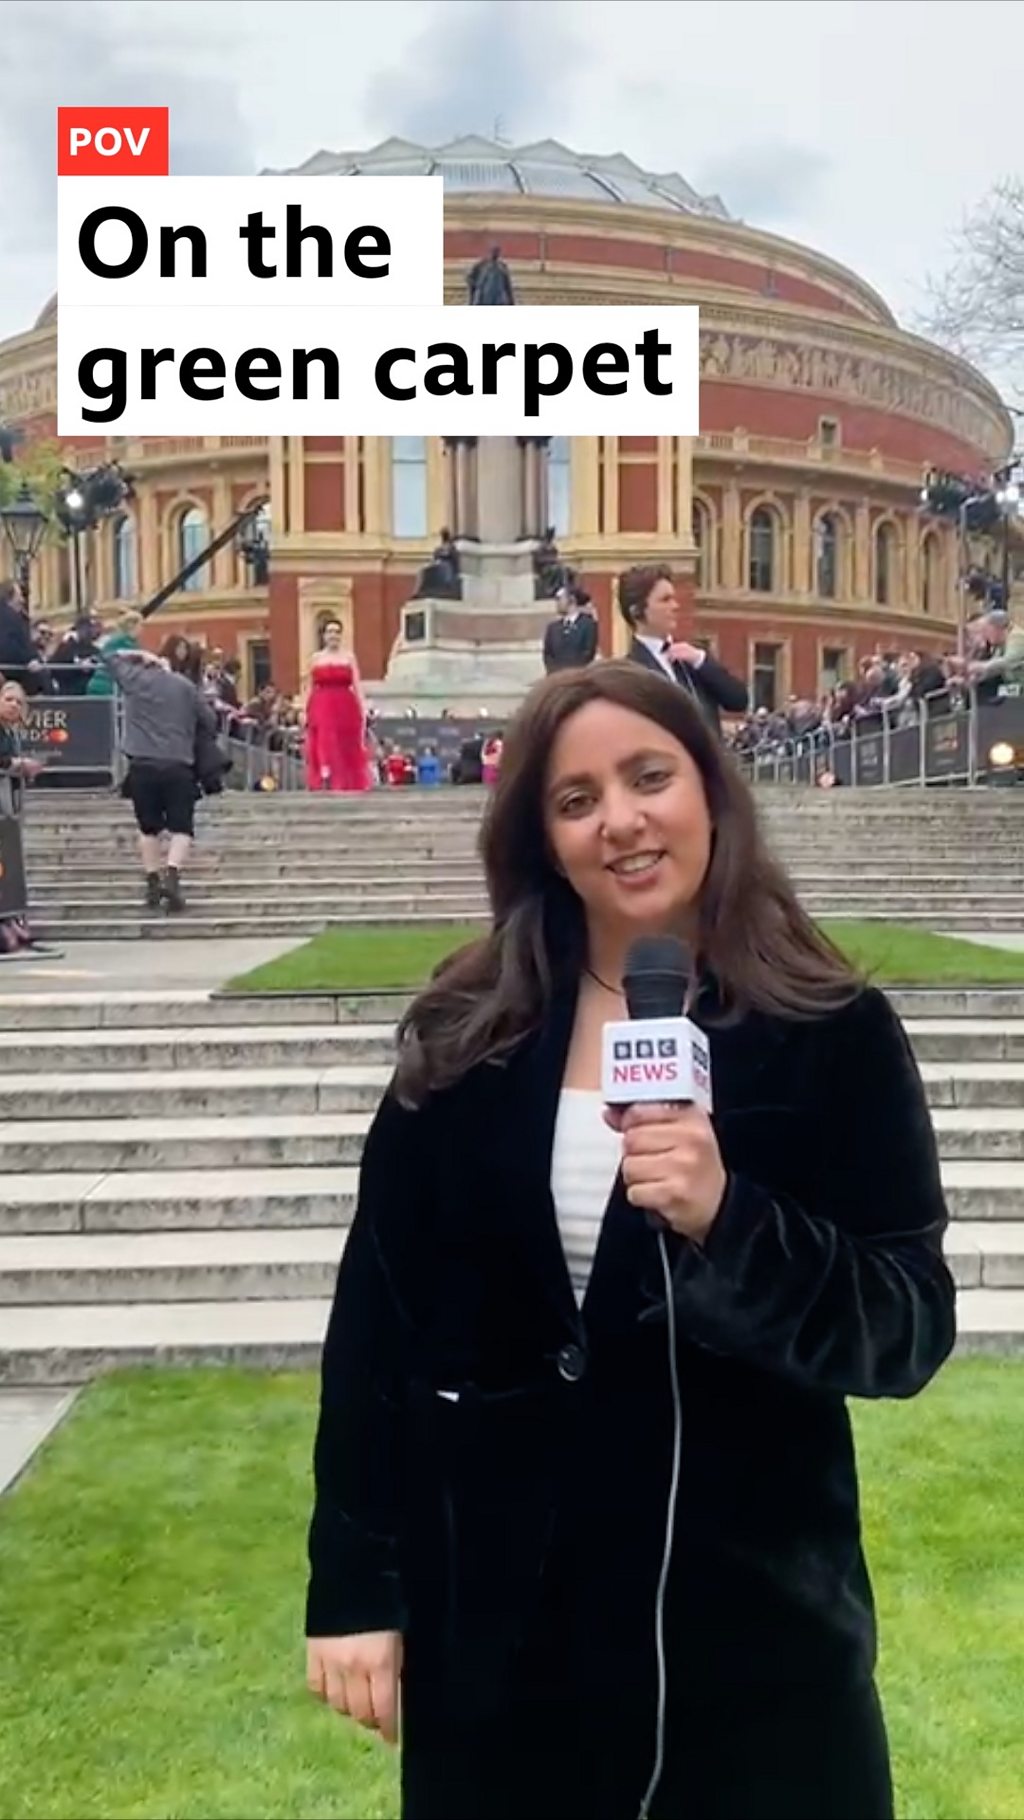 A woman stood on a 'green carpet' of grass in front of the Royal Albert Hall